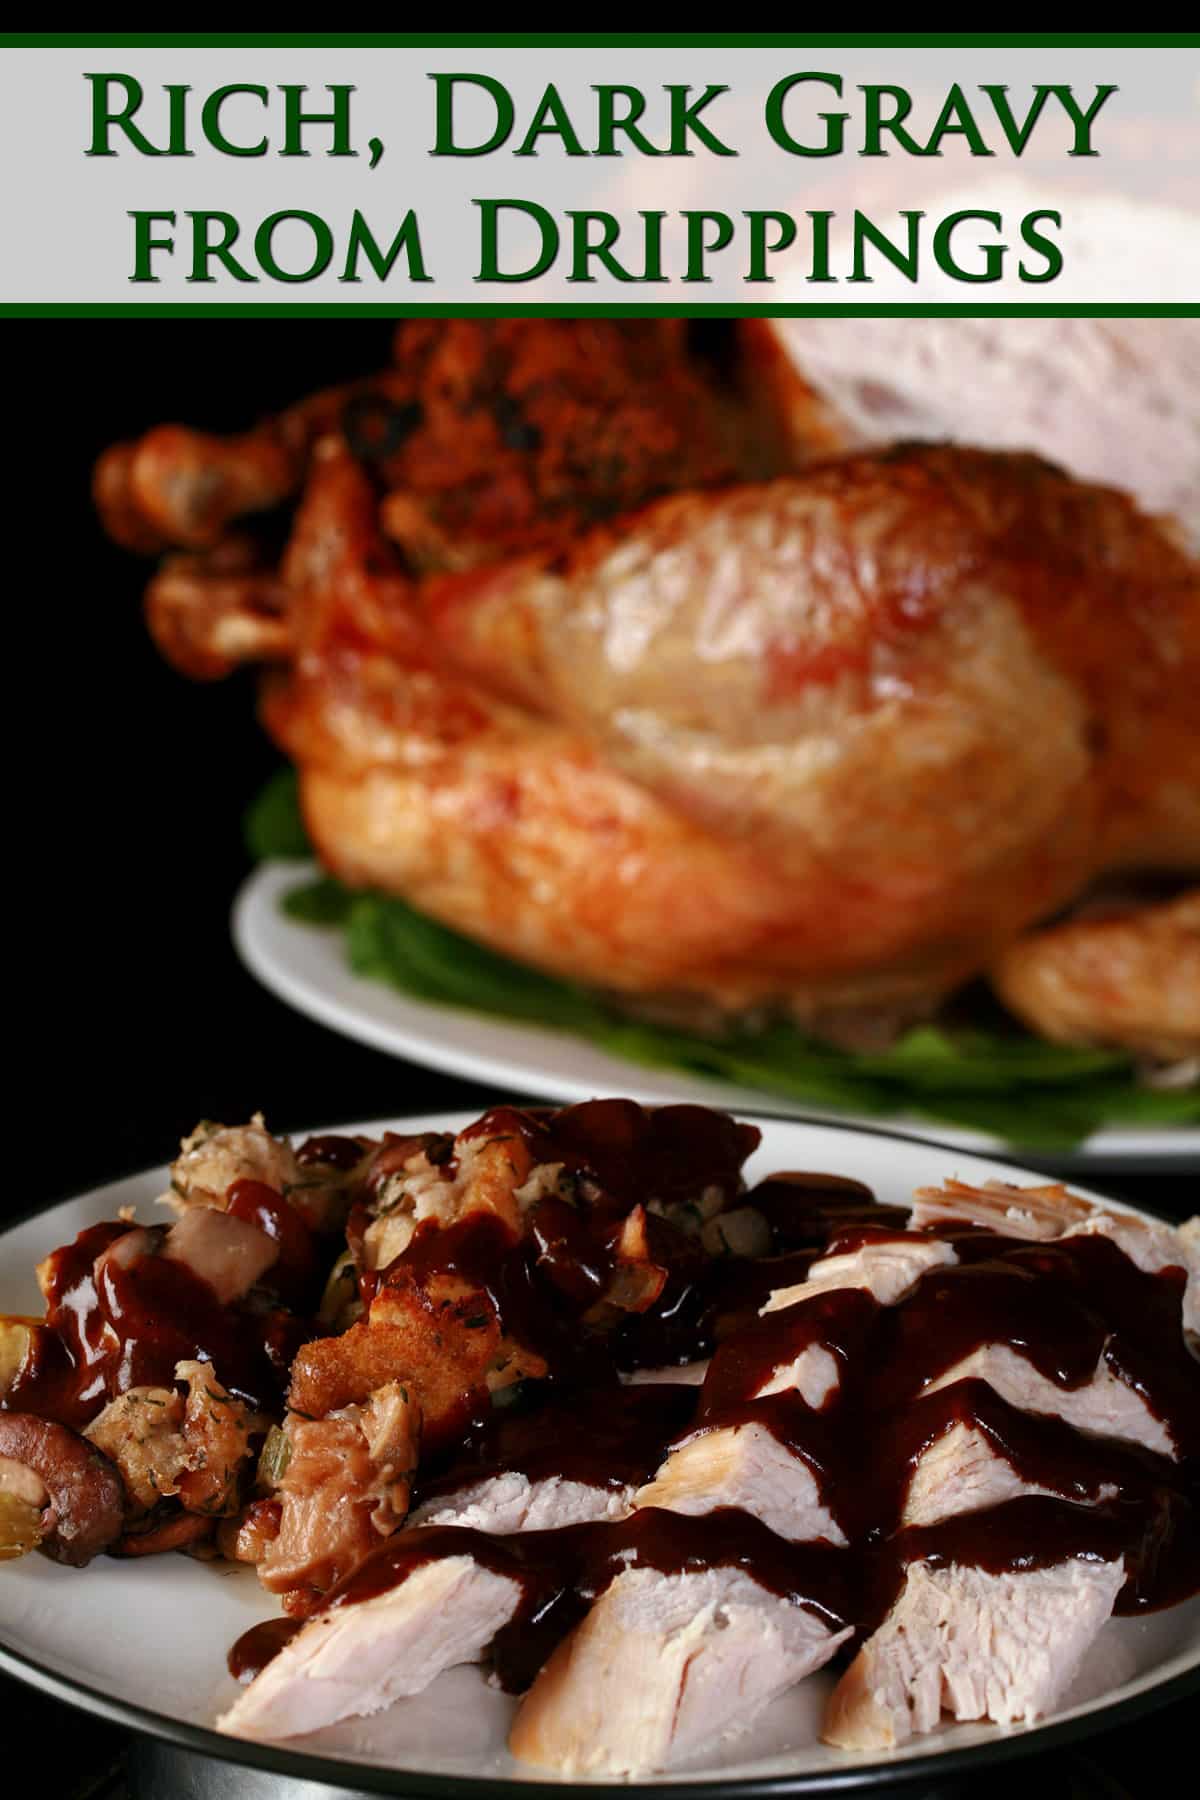 .A plate of turkey and stuffing drizzled with a rich dark turkey gravy in front of a roasted stuffed turkey.